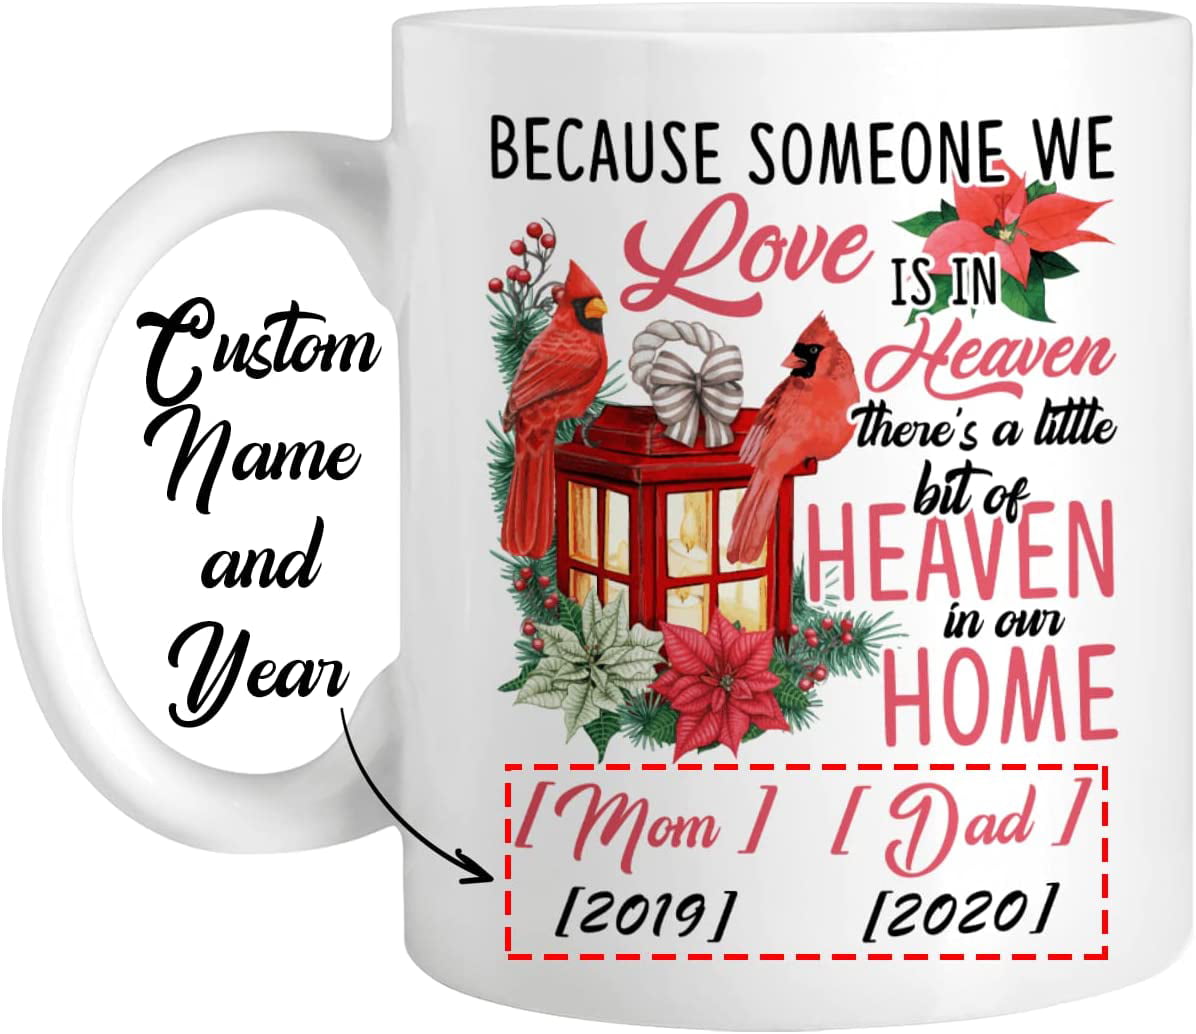 If you want me to listen talk about car car lovers coffee mug - Vista Stars  - Personalized gifts for the loved ones